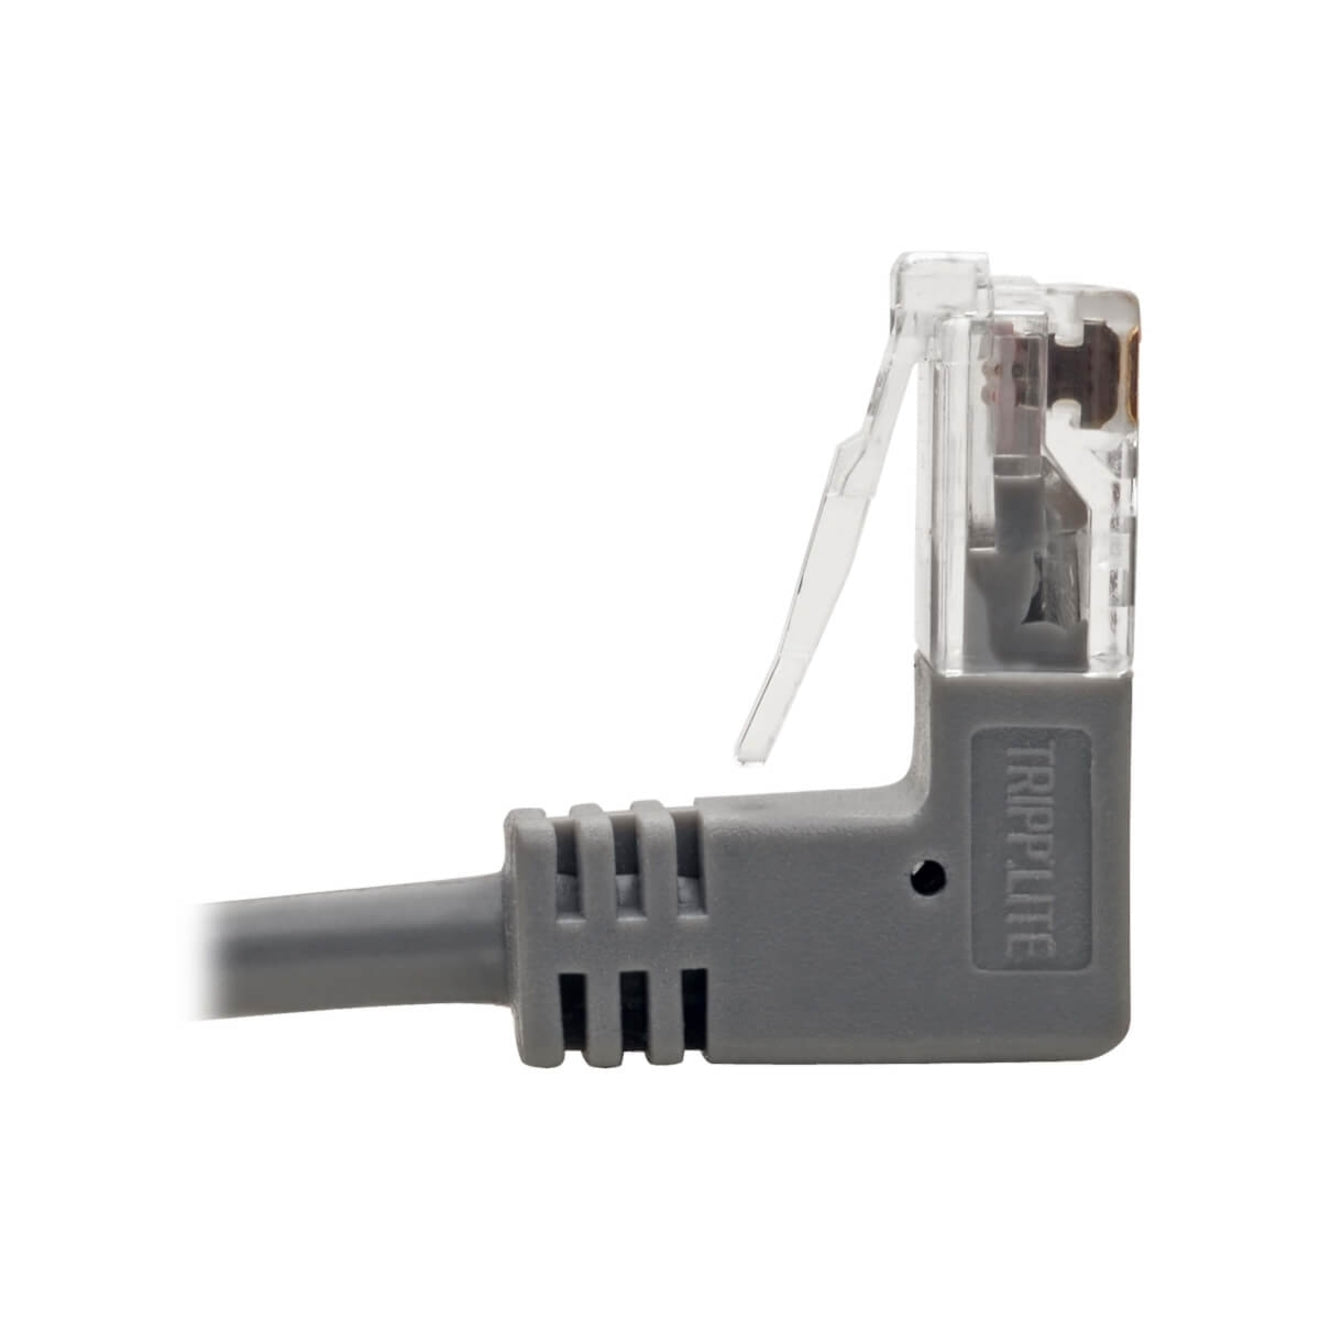 Tripp Lite N201-SR1-GY Right-Angle Cat6 UTP Patch Cable - 1 ft., M/M, Slim, Gray, Snagless